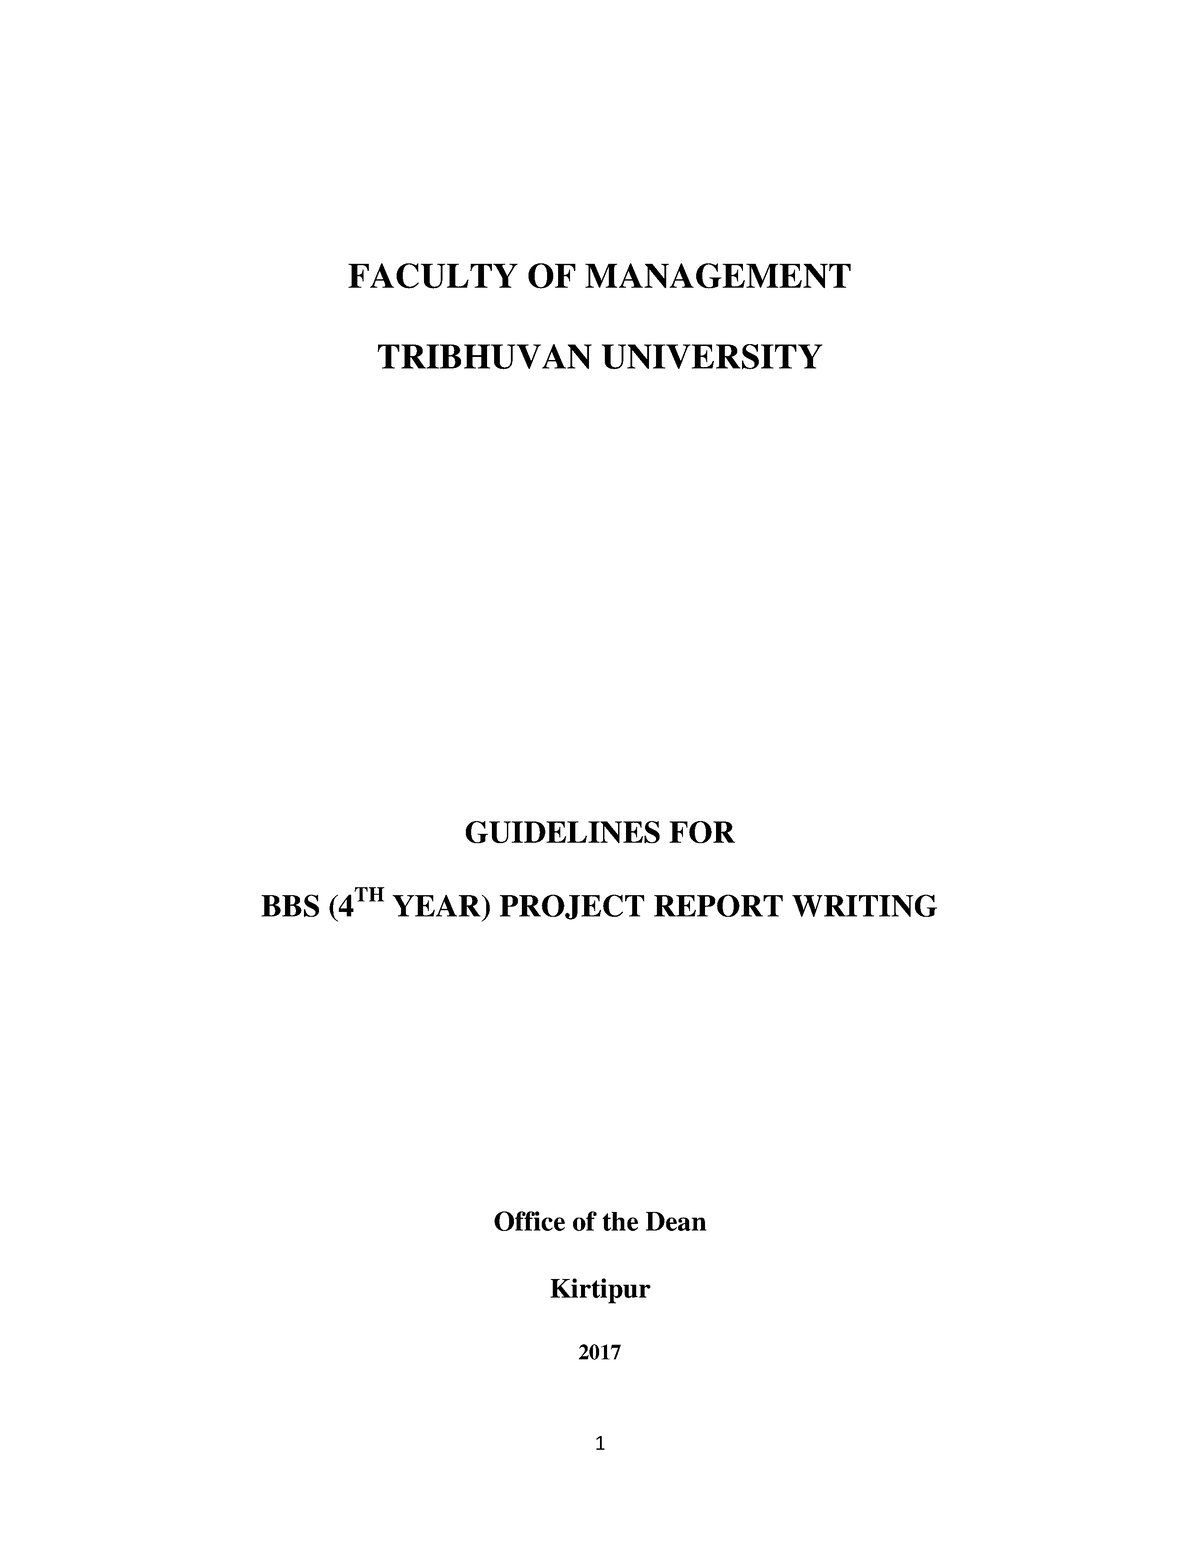 bbs 4th year thesis topics